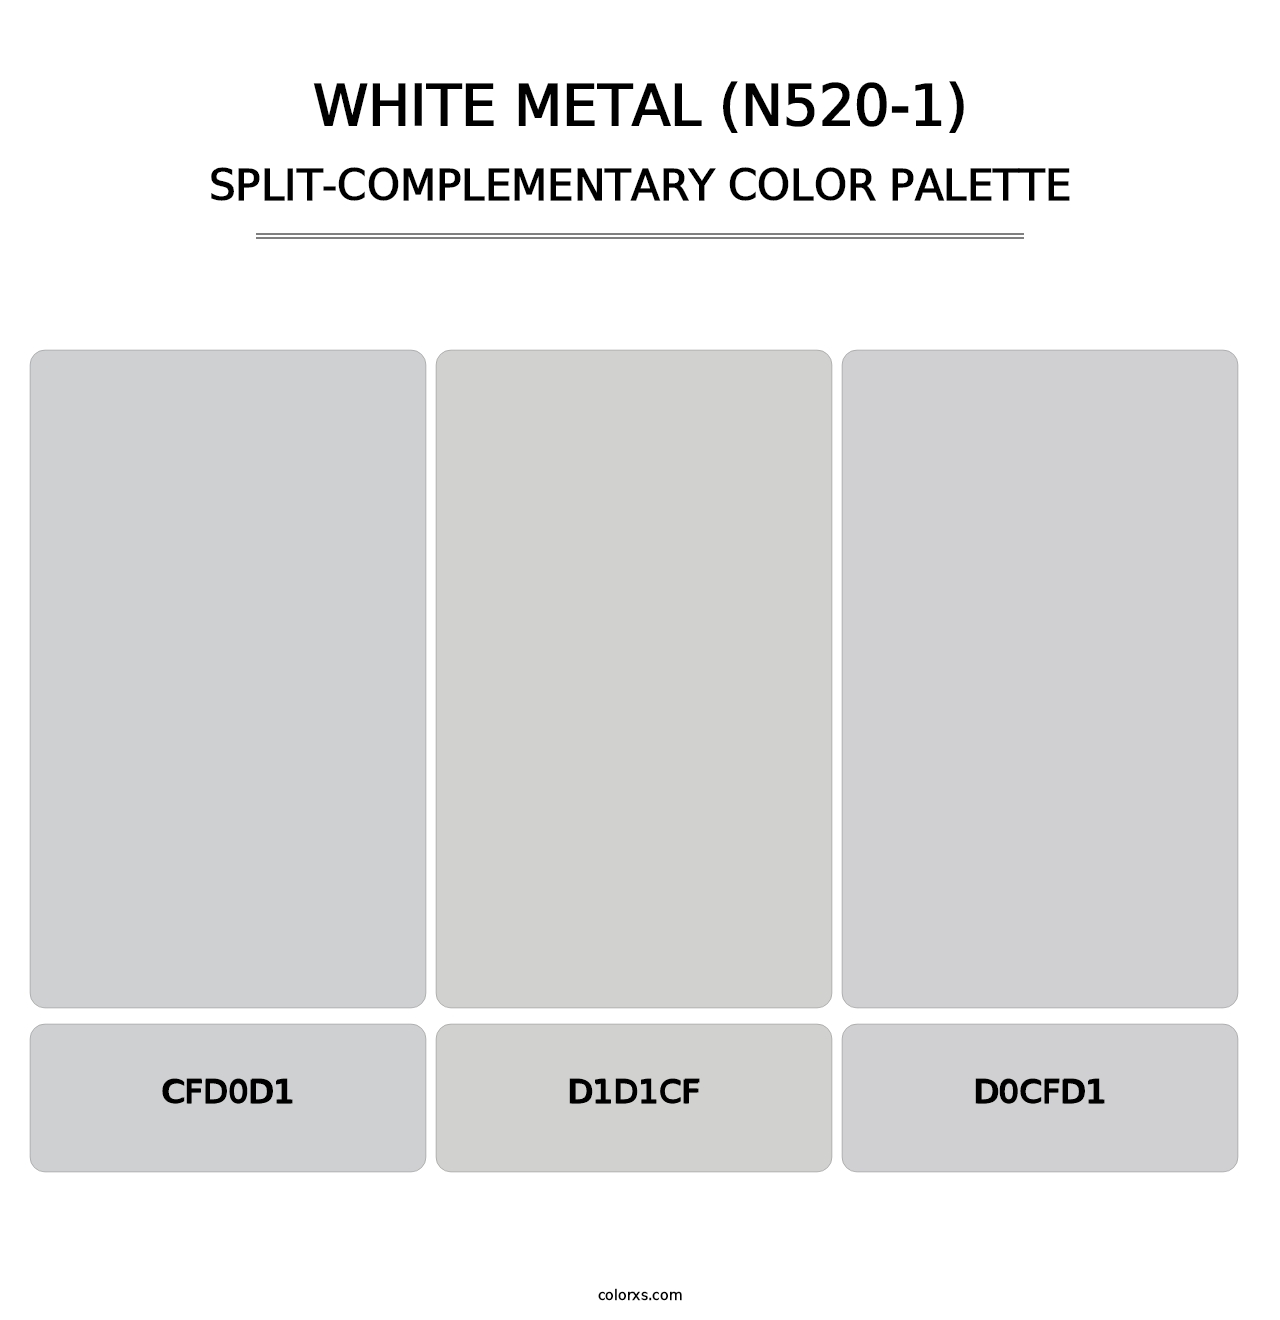 White Metal (N520-1) - Split-Complementary Color Palette